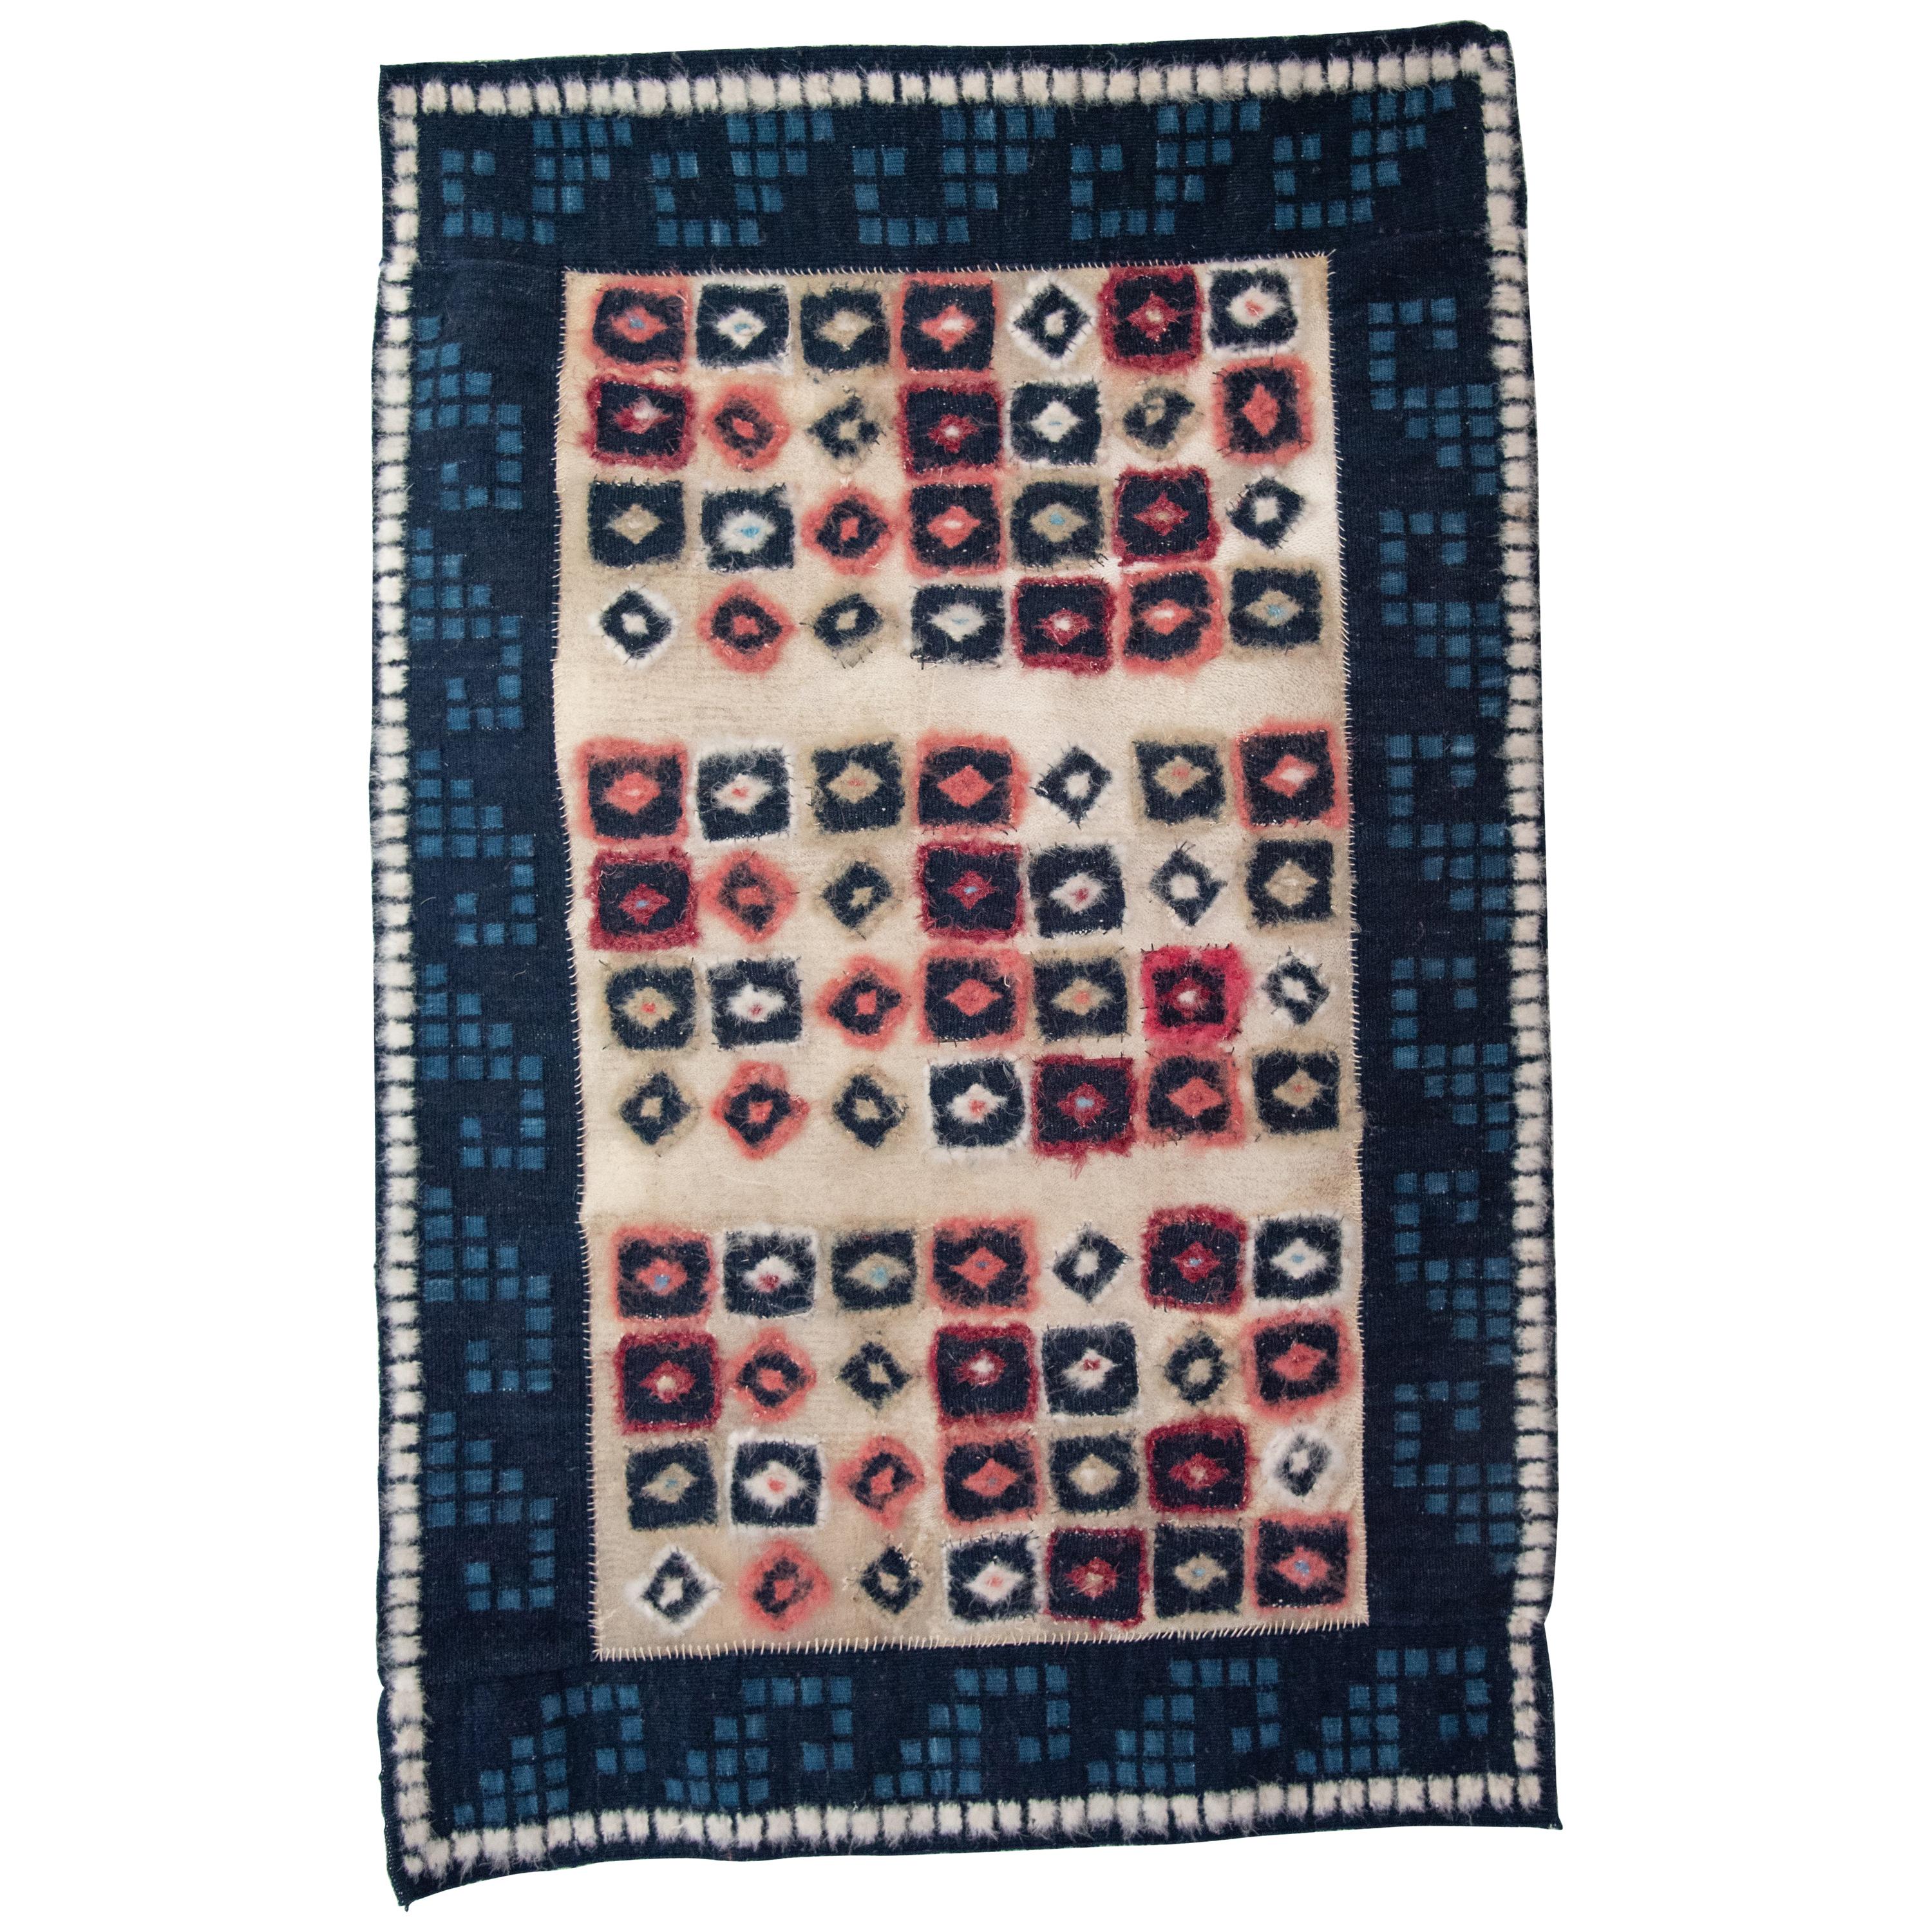 Zapotec Handwoven Natural Dyed Hanging Feather Rug Made in Oaxaca Mexico 